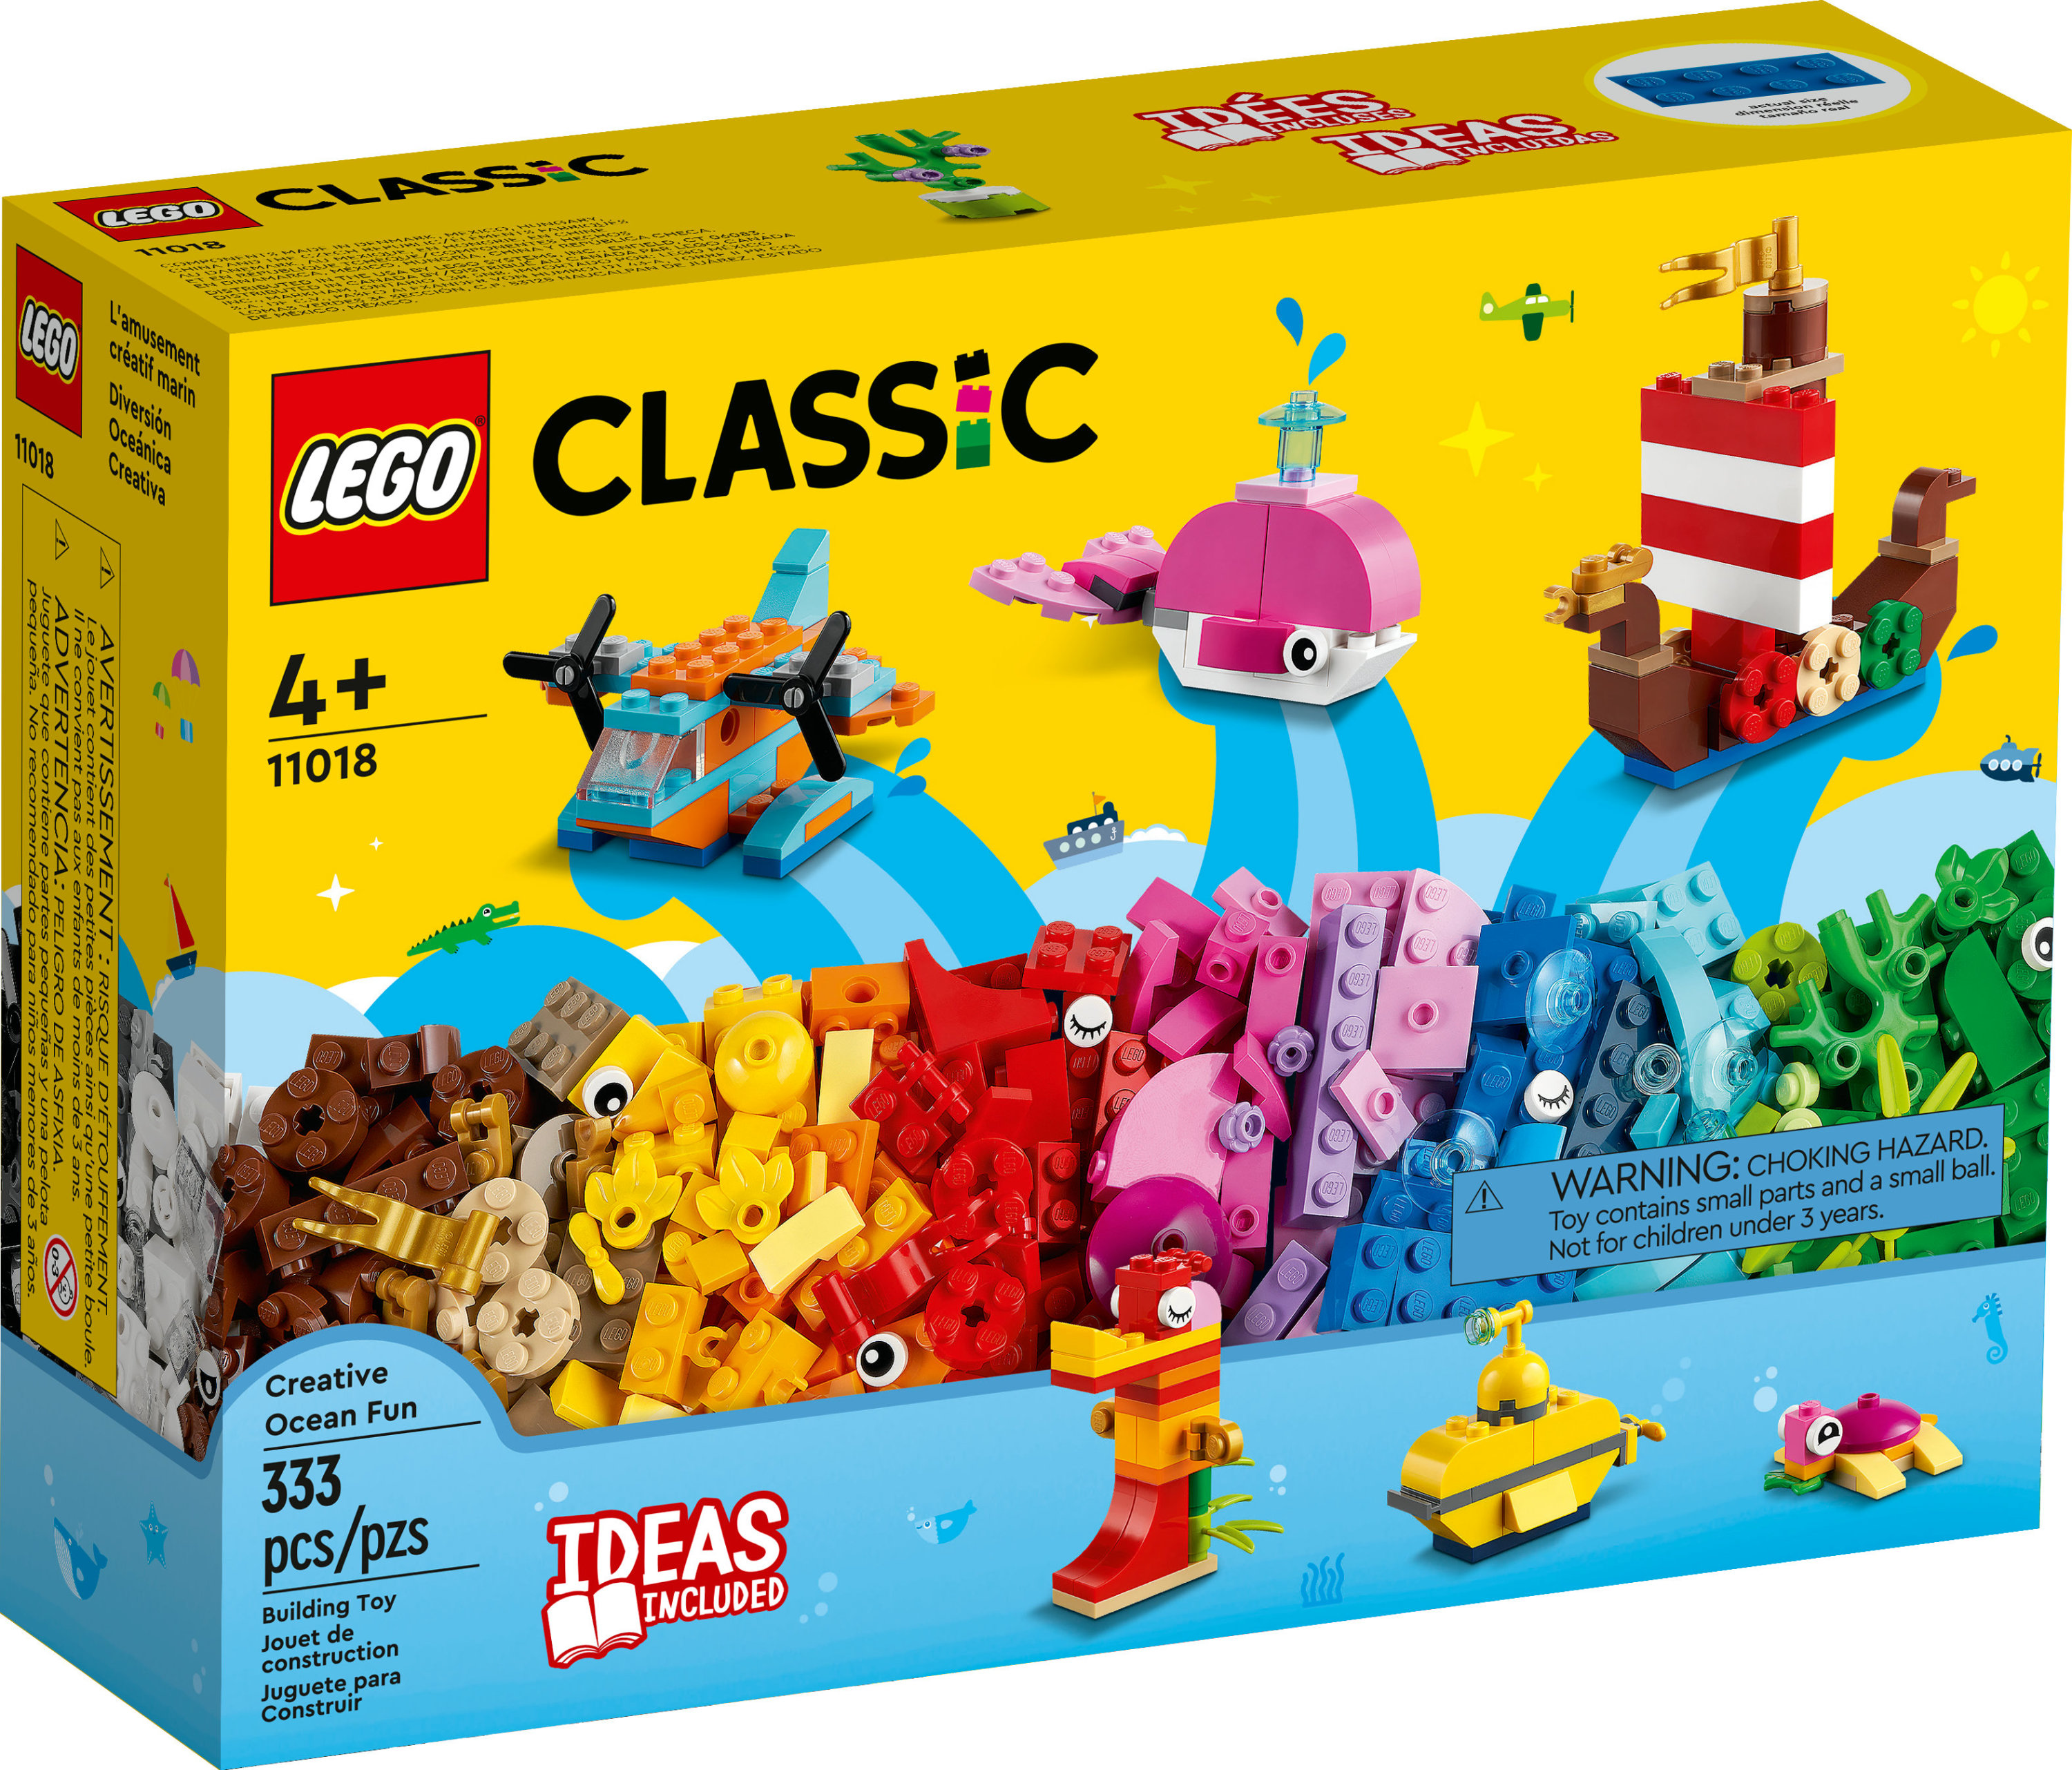 LEGO Classic Creative Ocean Fun 11018 Building Kit; With 6 Mini Builds, Including a Viking Ship and a Yellow Submarine, Plus Extra Bricks for Imaginative Play; Educational Toy for Ages 4+ (333 Pieces) - image 3 of 8